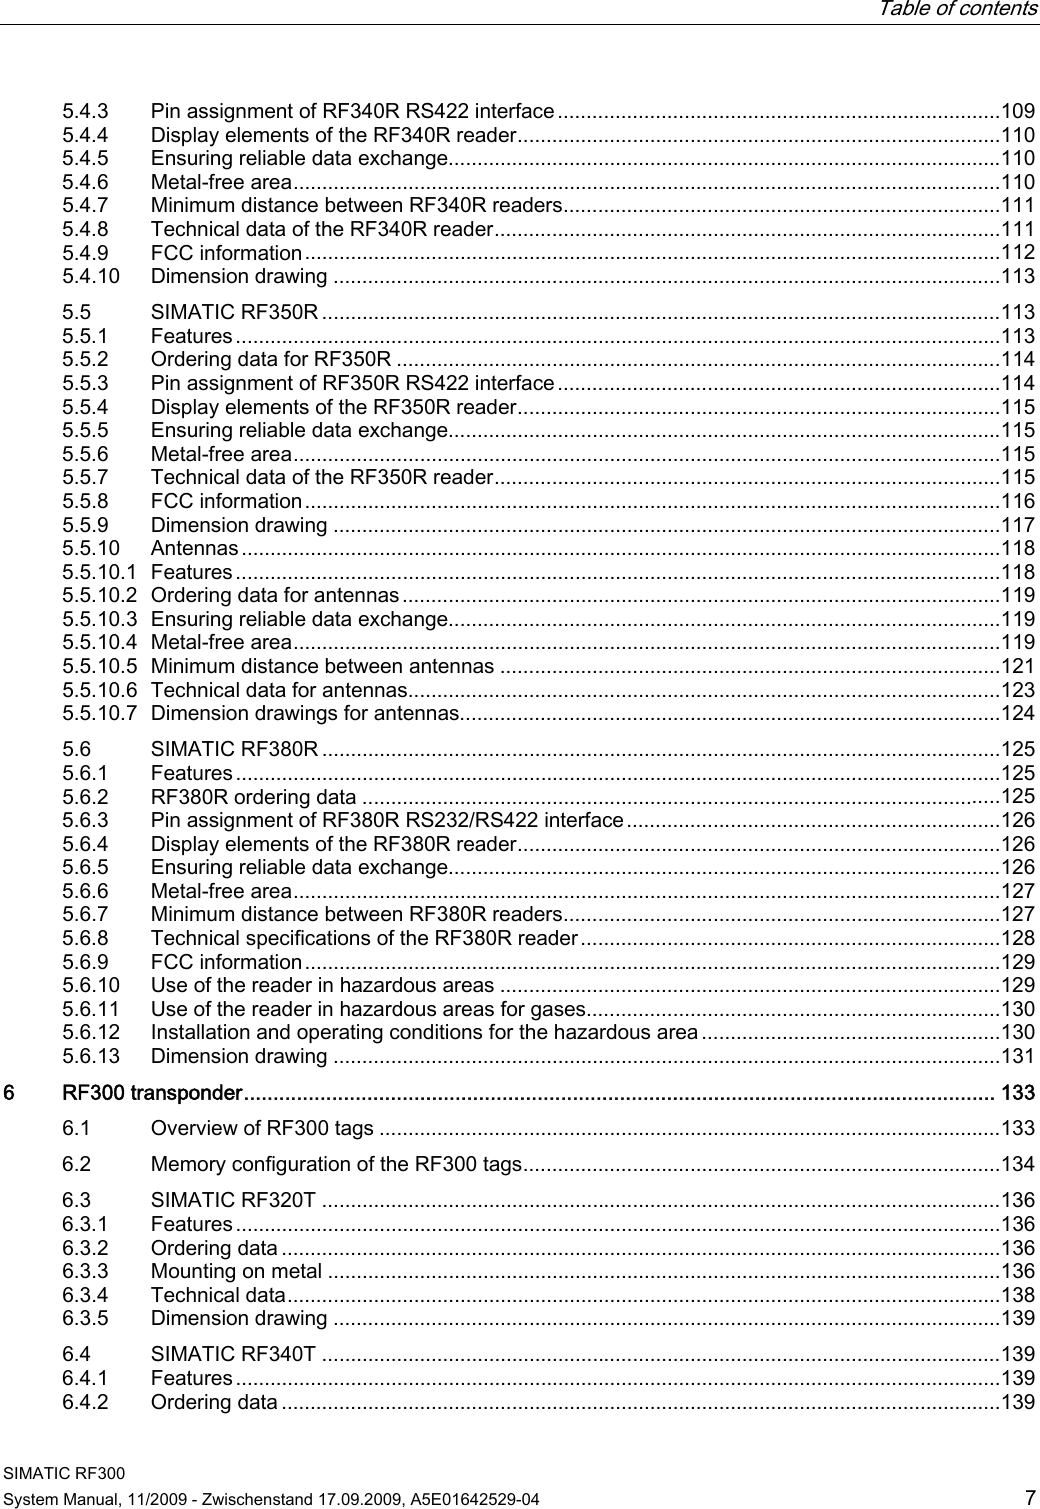   Table of contents   SIMATIC RF300 System Manual, 11/2009 - Zwischenstand 17.09.2009, A5E01642529-04  7 5.4.3  Pin assignment of RF340R RS422 interface.............................................................................109 5.4.4  Display elements of the RF340R reader....................................................................................110 5.4.5  Ensuring reliable data exchange................................................................................................110 5.4.6  Metal-free area...........................................................................................................................110 5.4.7  Minimum distance between RF340R readers............................................................................111 5.4.8  Technical data of the RF340R reader........................................................................................111 5.4.9  FCC information.........................................................................................................................112 5.4.10  Dimension drawing ....................................................................................................................113 5.5  SIMATIC RF350R ......................................................................................................................113 5.5.1  Features.....................................................................................................................................113 5.5.2  Ordering data for RF350R .........................................................................................................114 5.5.3  Pin assignment of RF350R RS422 interface.............................................................................114 5.5.4  Display elements of the RF350R reader....................................................................................115 5.5.5  Ensuring reliable data exchange................................................................................................115 5.5.6  Metal-free area...........................................................................................................................115 5.5.7  Technical data of the RF350R reader........................................................................................115 5.5.8  FCC information.........................................................................................................................116 5.5.9  Dimension drawing ....................................................................................................................117 5.5.10  Antennas....................................................................................................................................118 5.5.10.1  Features.....................................................................................................................................118 5.5.10.2  Ordering data for antennas........................................................................................................119 5.5.10.3  Ensuring reliable data exchange................................................................................................119 5.5.10.4  Metal-free area...........................................................................................................................119 5.5.10.5  Minimum distance between antennas .......................................................................................121 5.5.10.6 Technical data for antennas.......................................................................................................123 5.5.10.7  Dimension drawings for antennas..............................................................................................124 5.6  SIMATIC RF380R ......................................................................................................................125 5.6.1  Features.....................................................................................................................................125 5.6.2  RF380R ordering data ...............................................................................................................125 5.6.3  Pin assignment of RF380R RS232/RS422 interface.................................................................126 5.6.4  Display elements of the RF380R reader....................................................................................126 5.6.5  Ensuring reliable data exchange................................................................................................126 5.6.6  Metal-free area...........................................................................................................................127 5.6.7  Minimum distance between RF380R readers............................................................................127 5.6.8  Technical specifications of the RF380R reader.........................................................................128 5.6.9  FCC information.........................................................................................................................129 5.6.10  Use of the reader in hazardous areas .......................................................................................129 5.6.11 Use of the reader in hazardous areas for gases........................................................................130 5.6.12  Installation and operating conditions for the hazardous area....................................................130 5.6.13  Dimension drawing ....................................................................................................................131 6  RF300 transponder................................................................................................................................ 133 6.1  Overview of RF300 tags ............................................................................................................133 6.2  Memory configuration of the RF300 tags...................................................................................134 6.3  SIMATIC RF320T ......................................................................................................................136 6.3.1  Features.....................................................................................................................................136 6.3.2  Ordering data .............................................................................................................................136 6.3.3  Mounting on metal .....................................................................................................................136 6.3.4  Technical data............................................................................................................................138 6.3.5  Dimension drawing ....................................................................................................................139 6.4  SIMATIC RF340T ......................................................................................................................139 6.4.1  Features.....................................................................................................................................139 6.4.2  Ordering data .............................................................................................................................139 